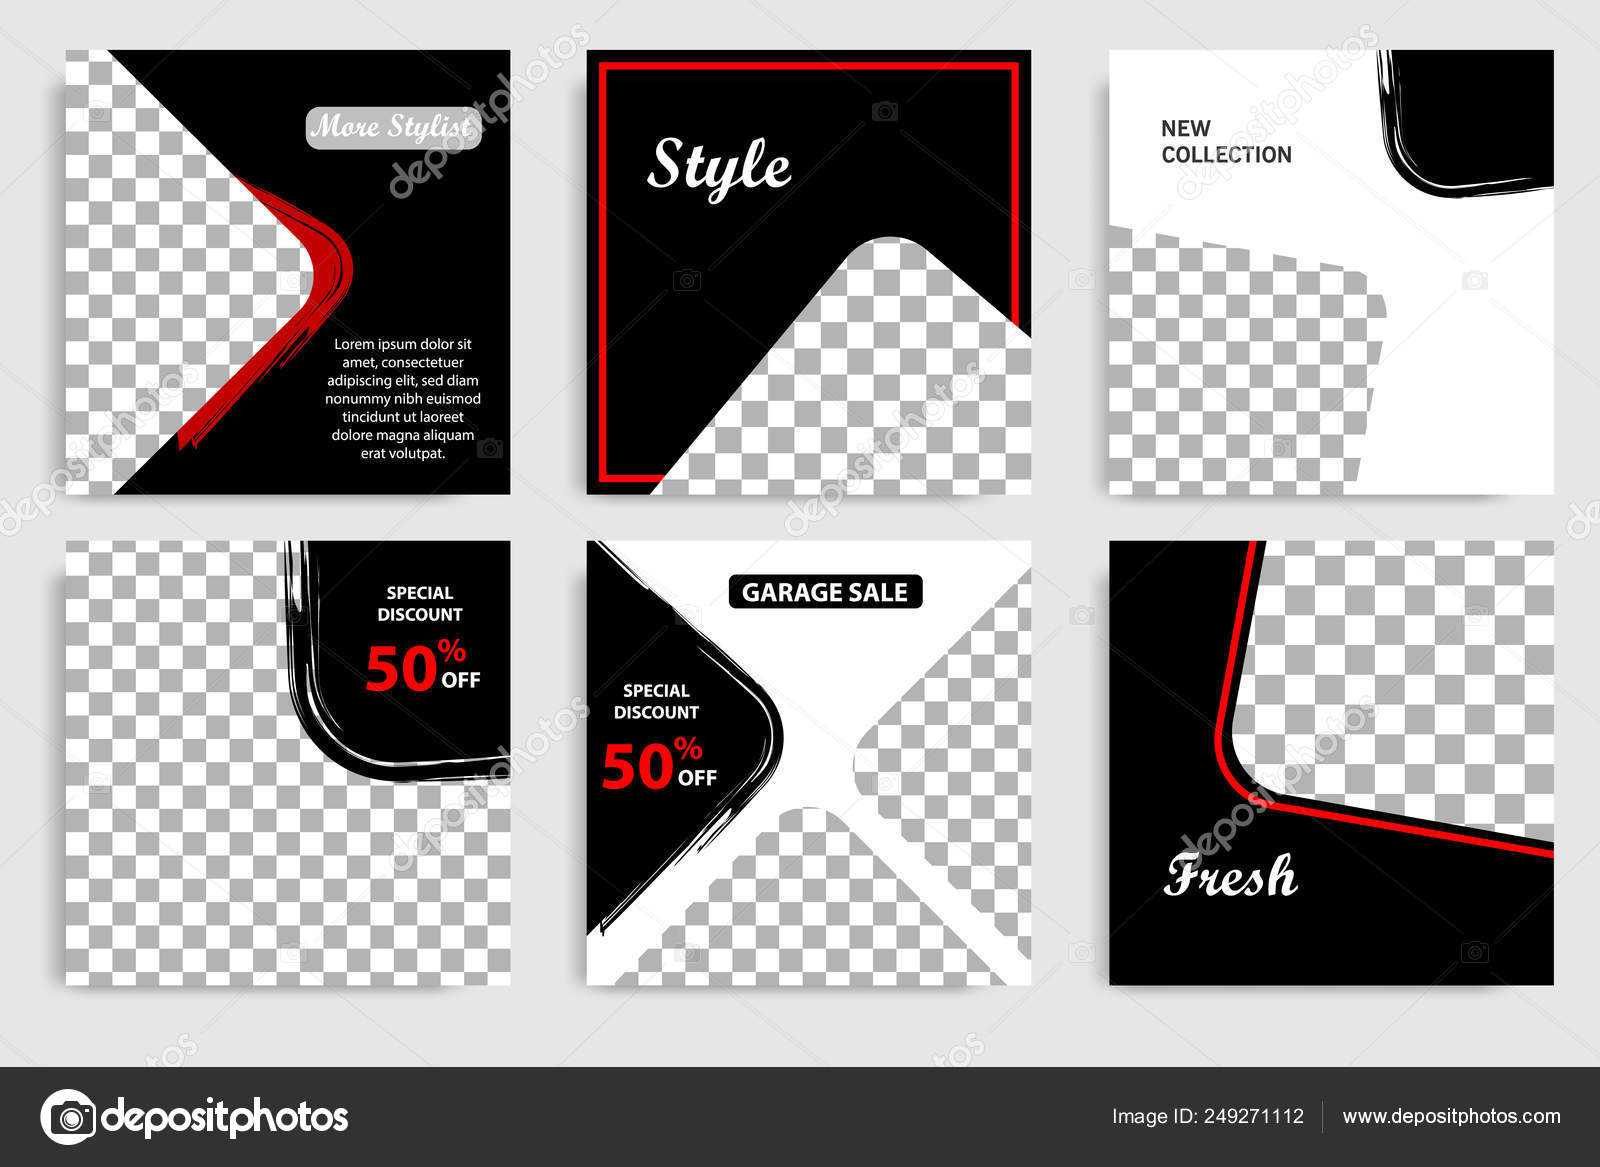 Editable Minimal Square Banner Template Black White Throughout College Banner Template